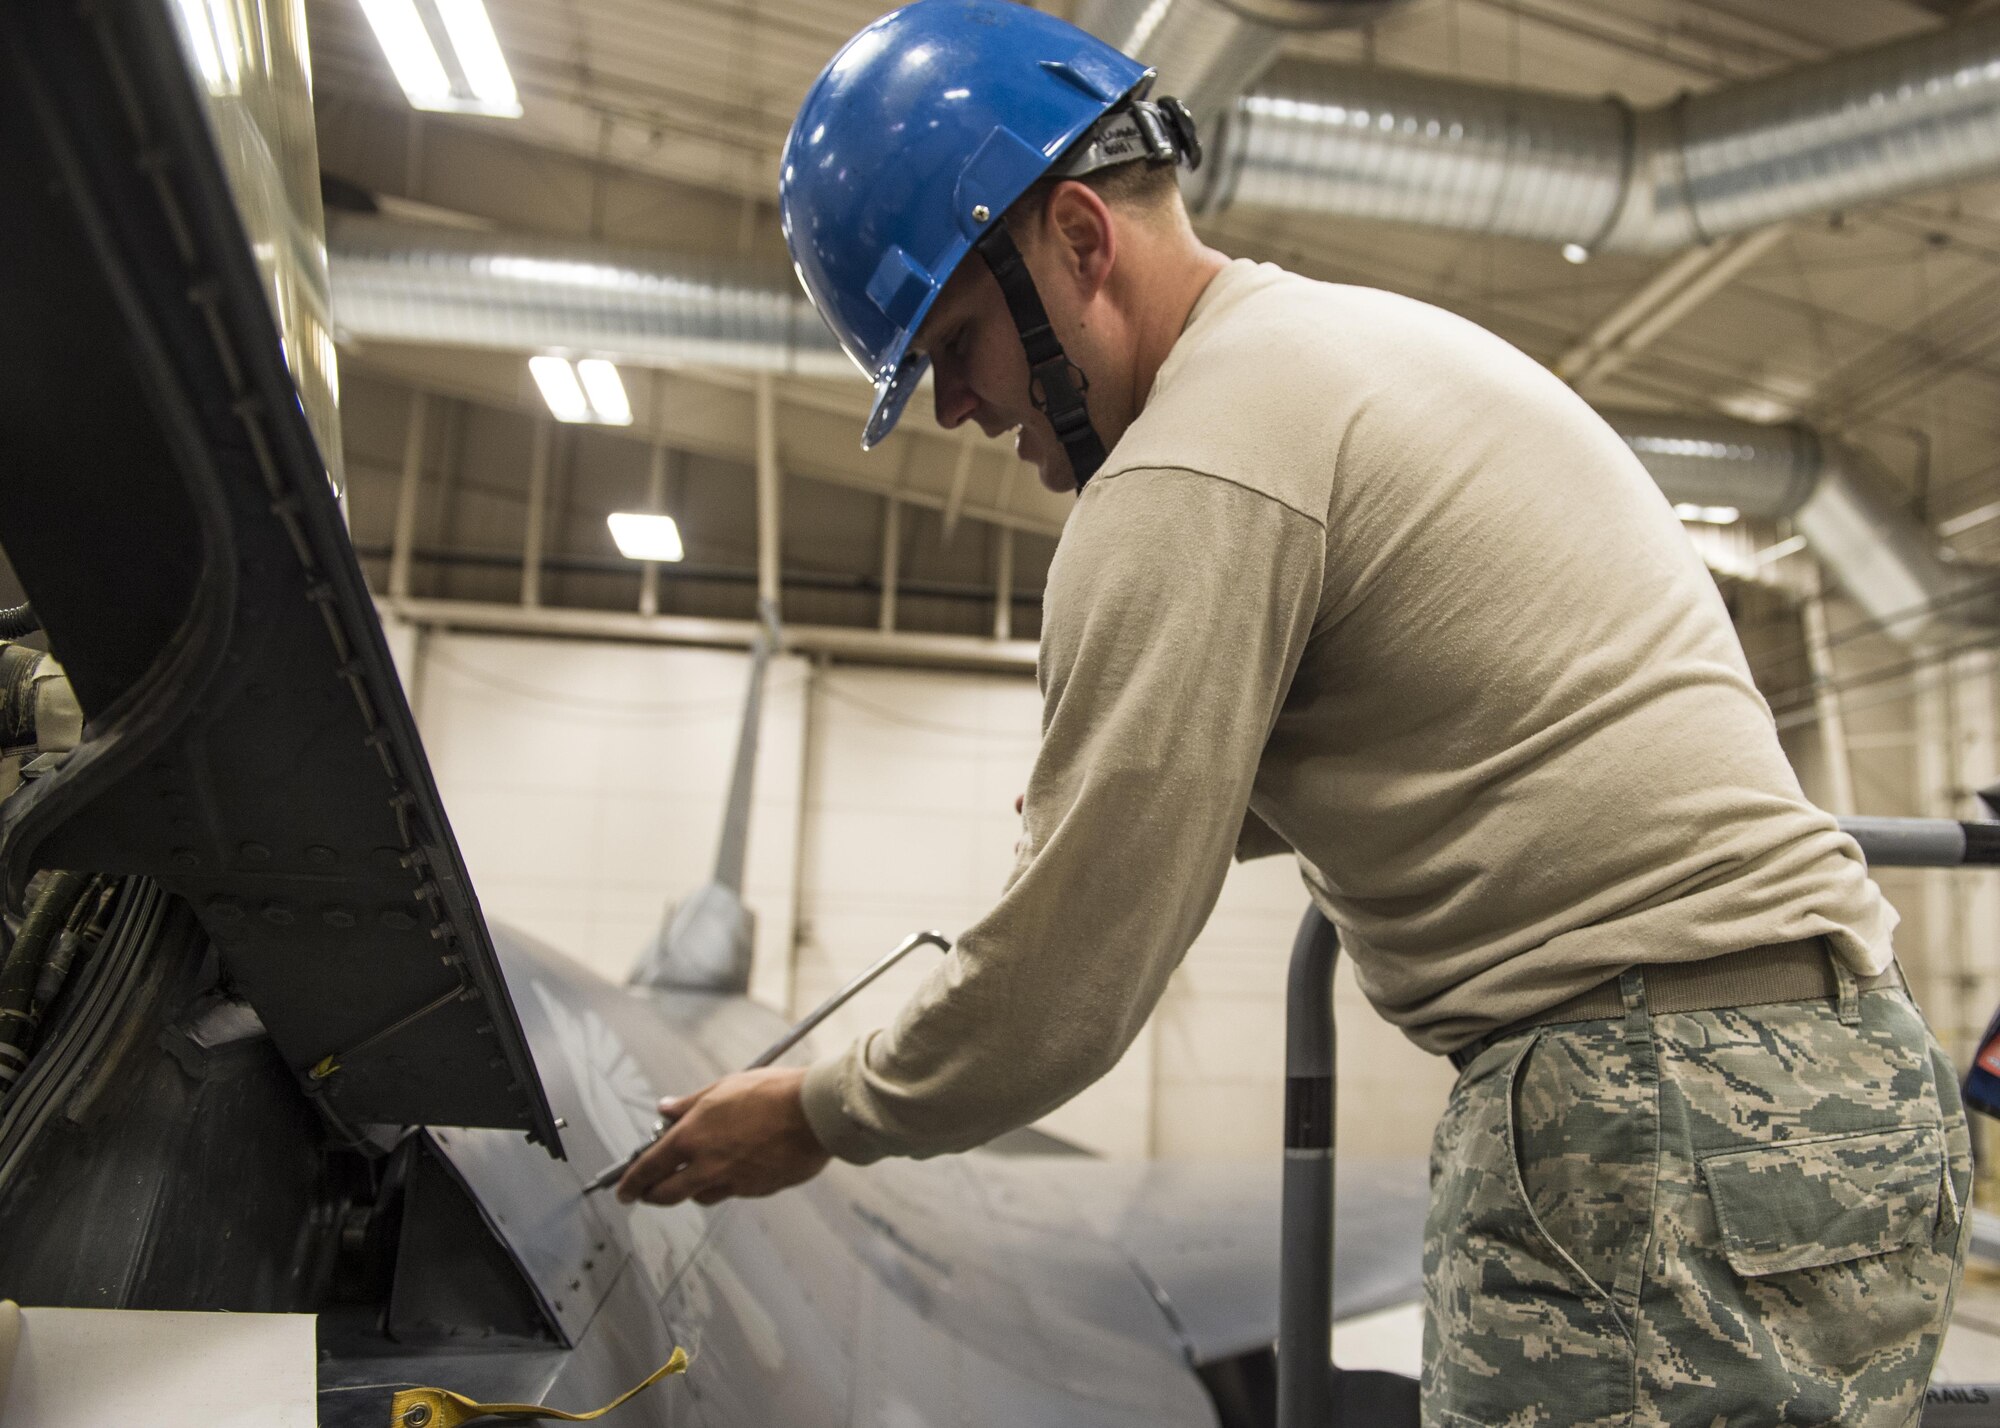 Staff Sgt. Mitchell Lawhorn, a 54th Maintenance Squadron egress systems craftsman, removes an aircraft panel before removing the canopy of an F-16 Fighting Falcon on March 13, 2017 at Holloman Air Force Base, N.M. Egress system specialists ensure that pilots can safely eject from aircraft in the event of an emergency. They perform scheduled and unscheduled maintenance on seats, hatches, canopies and modules to ensure pilots can safely eject if necessary. (U.S. Air Force photo by Senior Airman Emily Kenney)